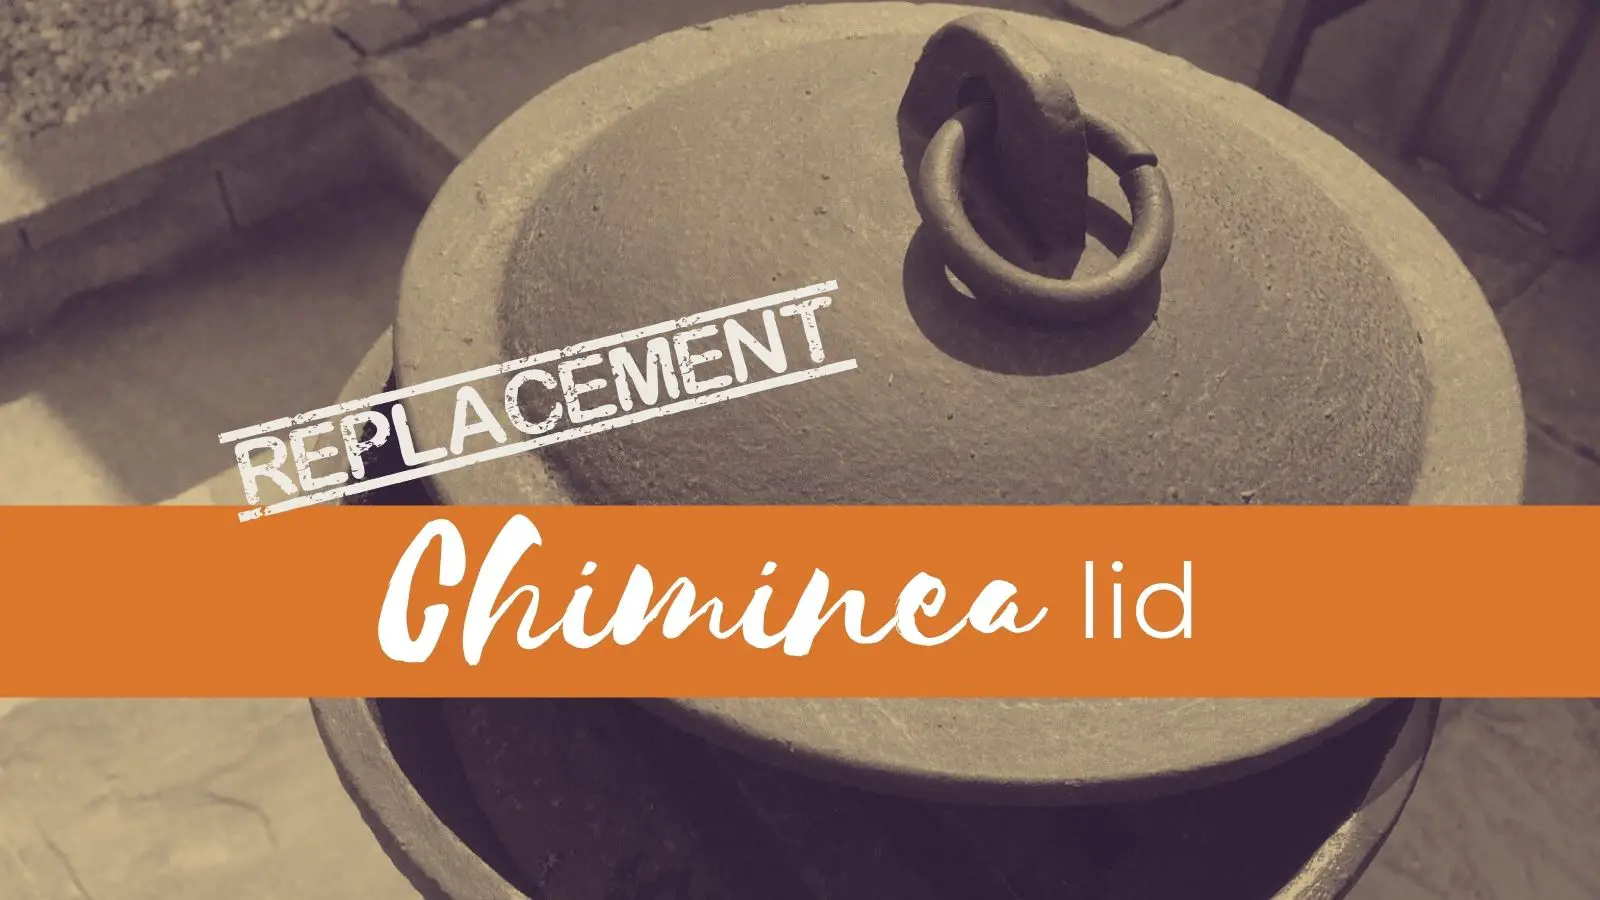 REPLACEMENT CHIMINEA LID - WHERE TO GET ONE